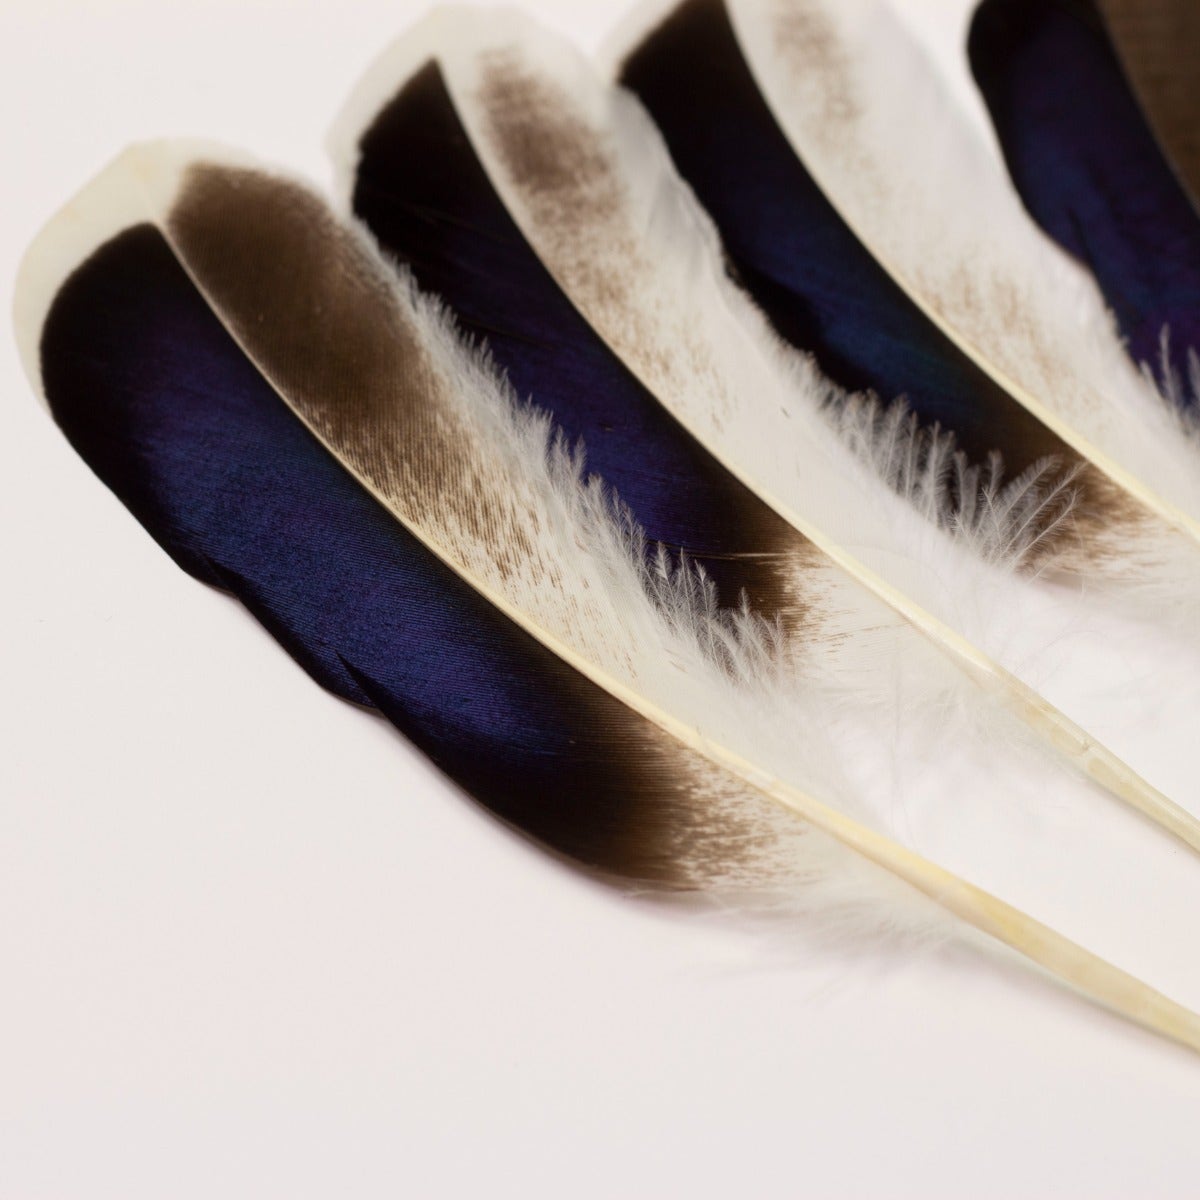 Natural Duck Feathers 3-5" - 100 pcs